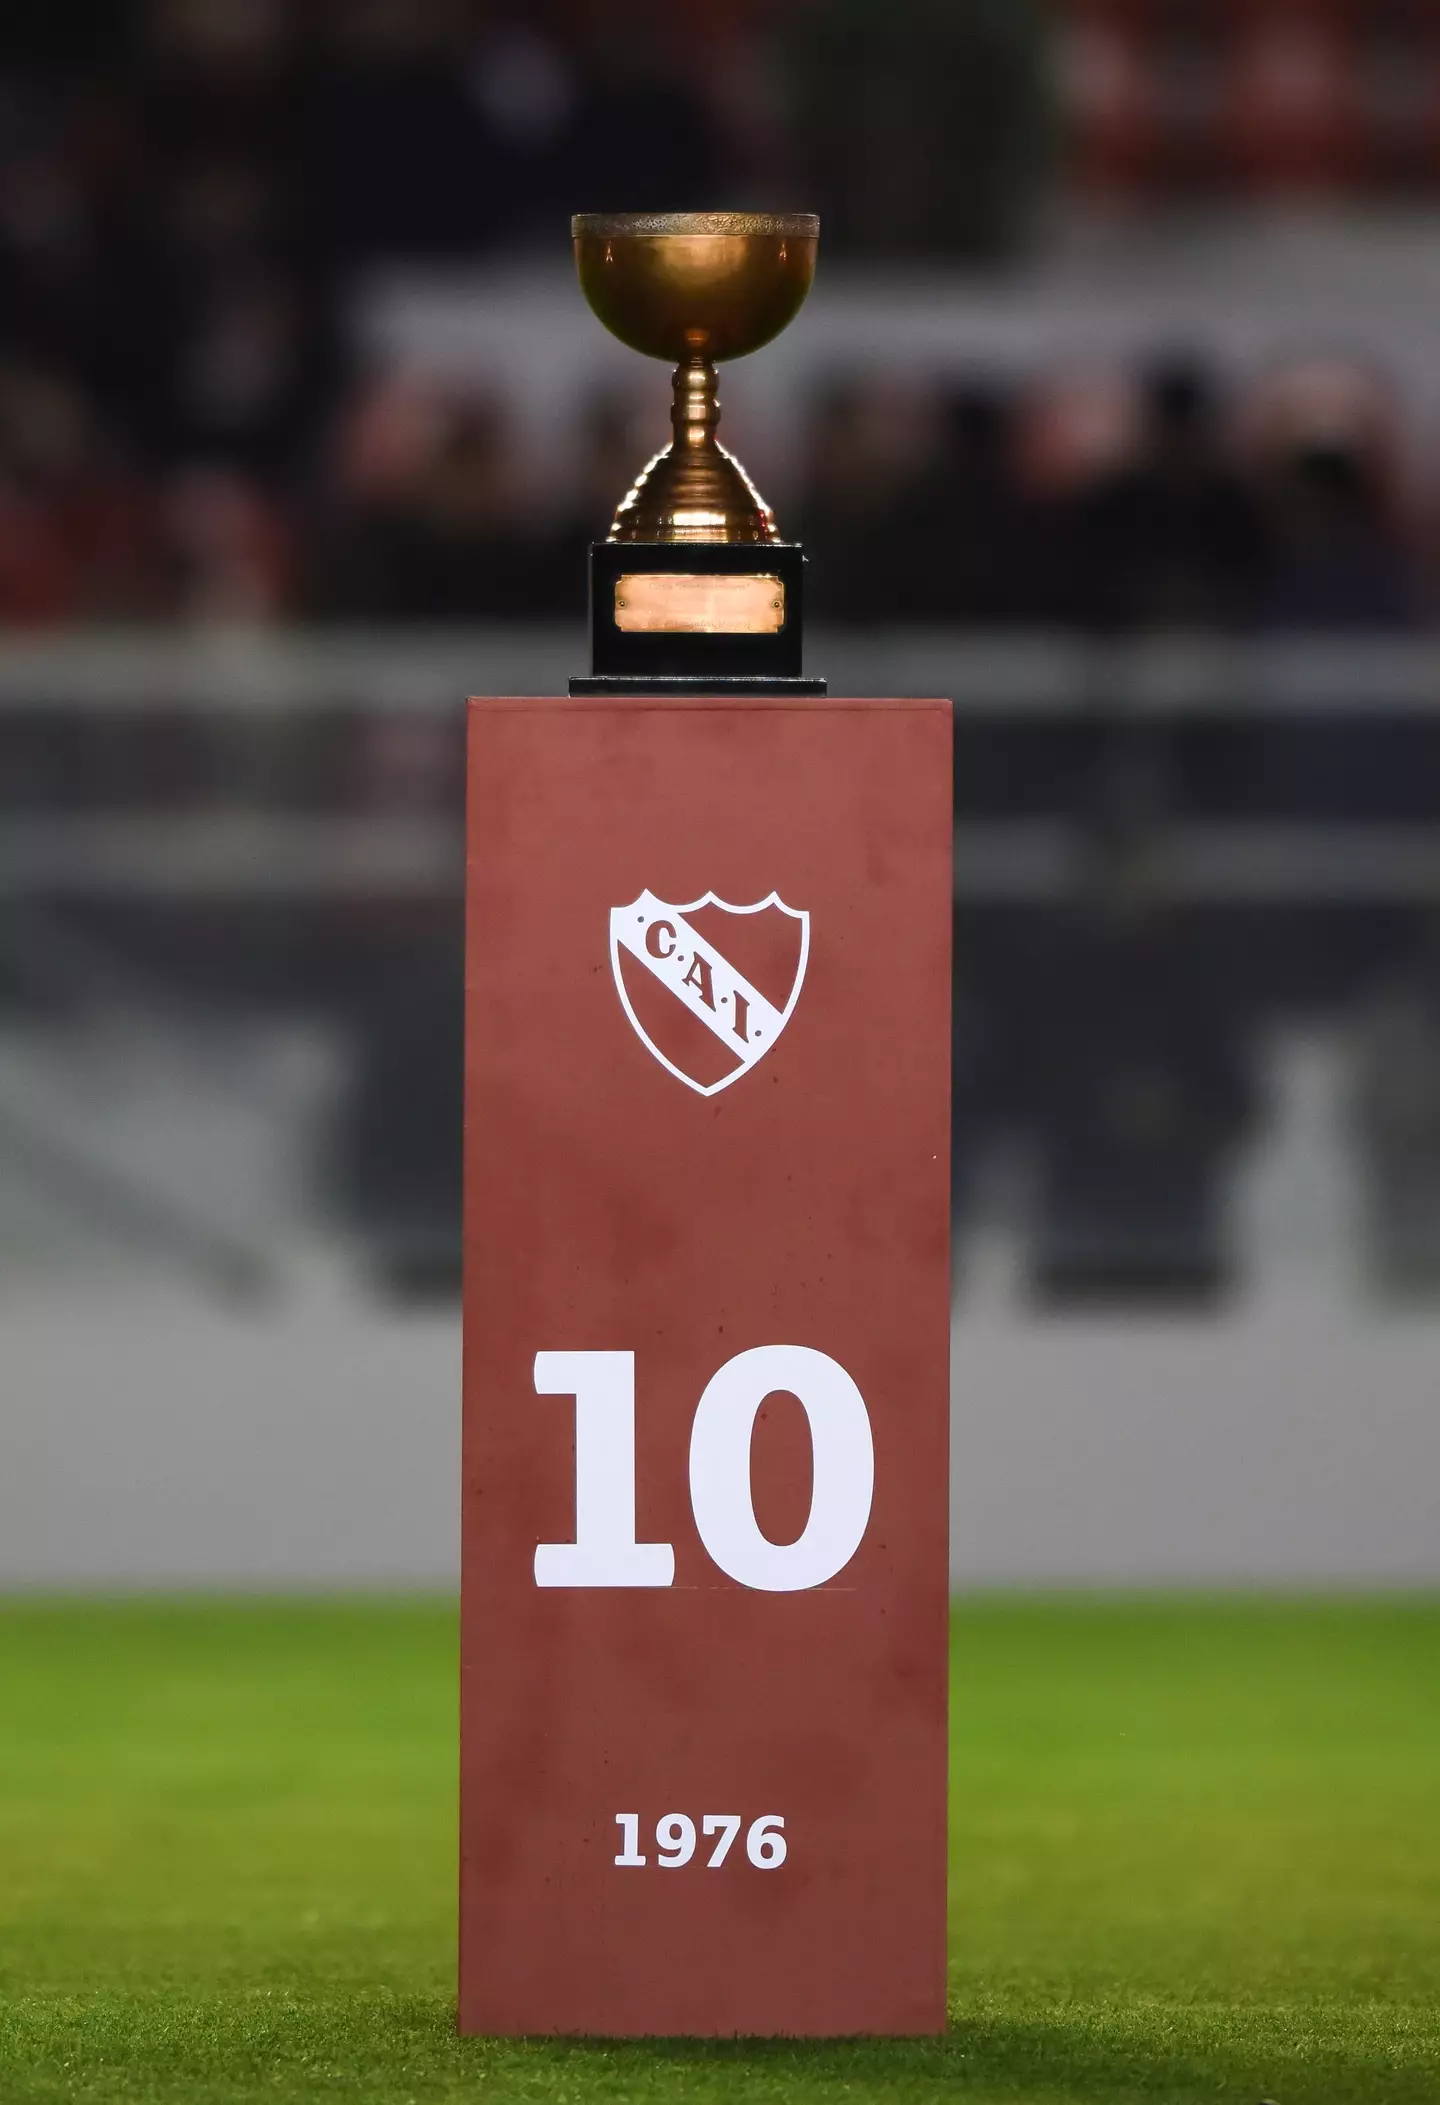 The Copa Interamericana trophy displayed during a celebration of Independiente. Image credit: Getty 